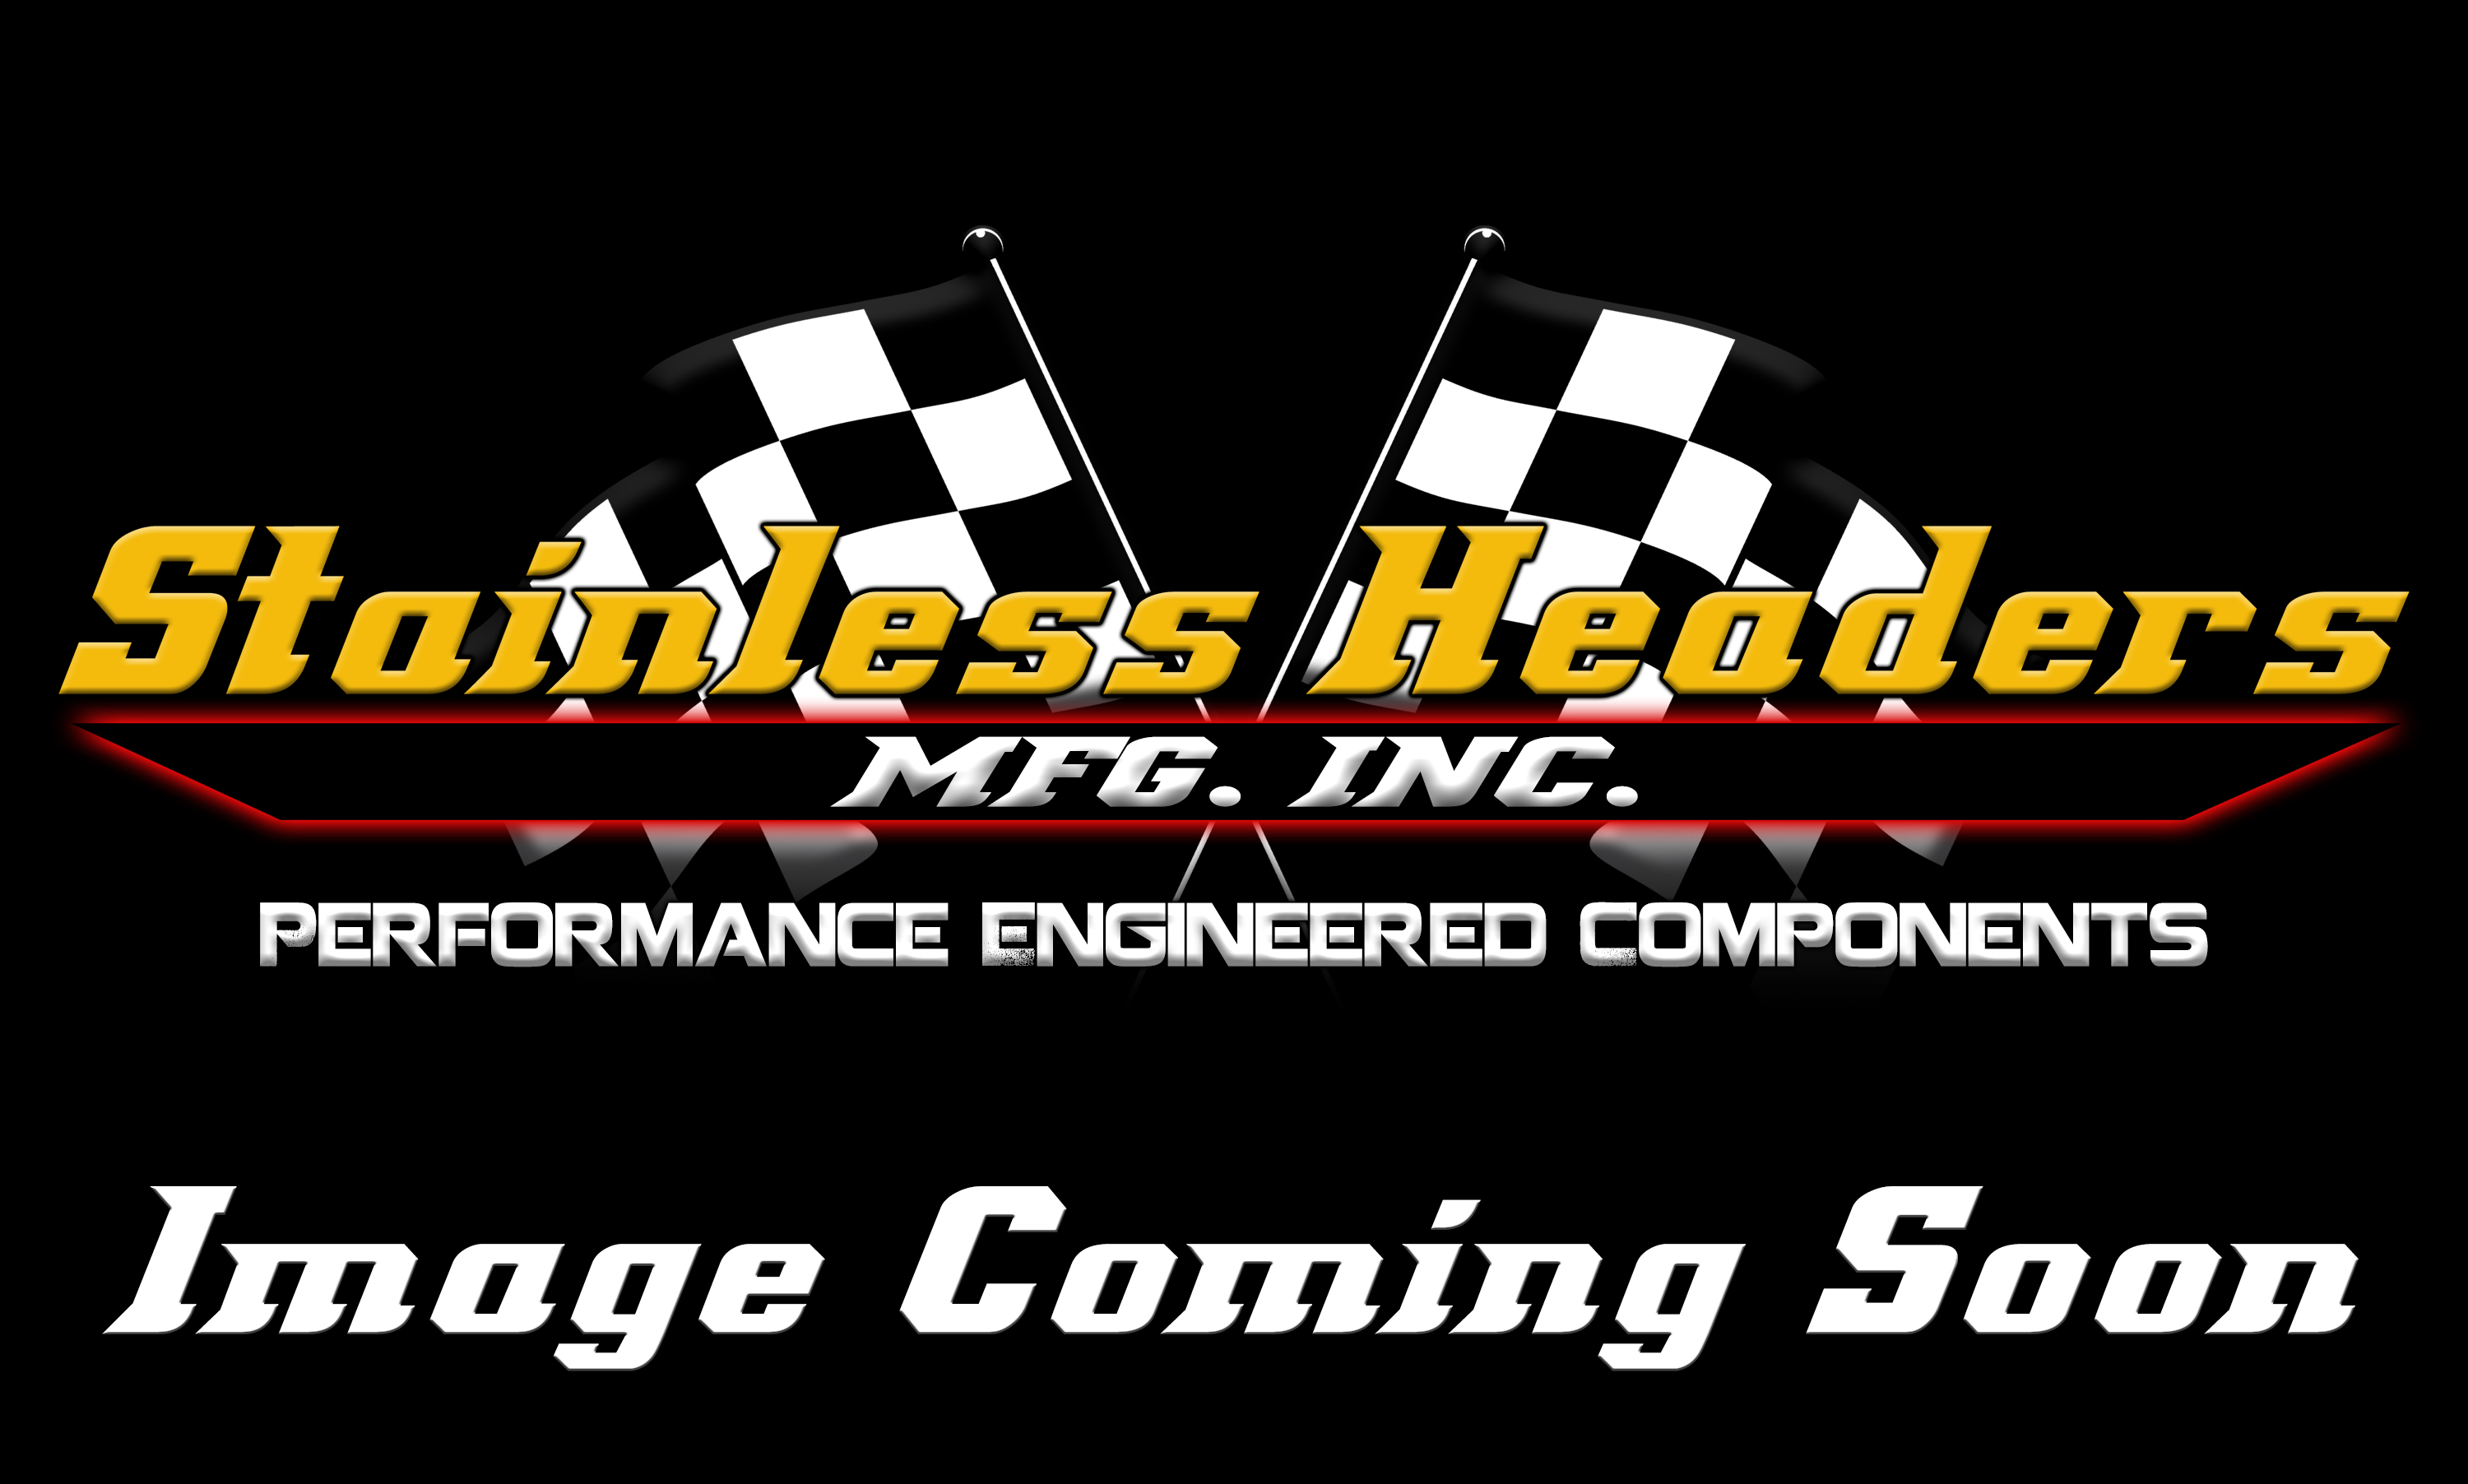 Stainless Headers - 2 1/2" Primary 8 into 1 Performance Merge Collector-18ga 304ss - Image 2